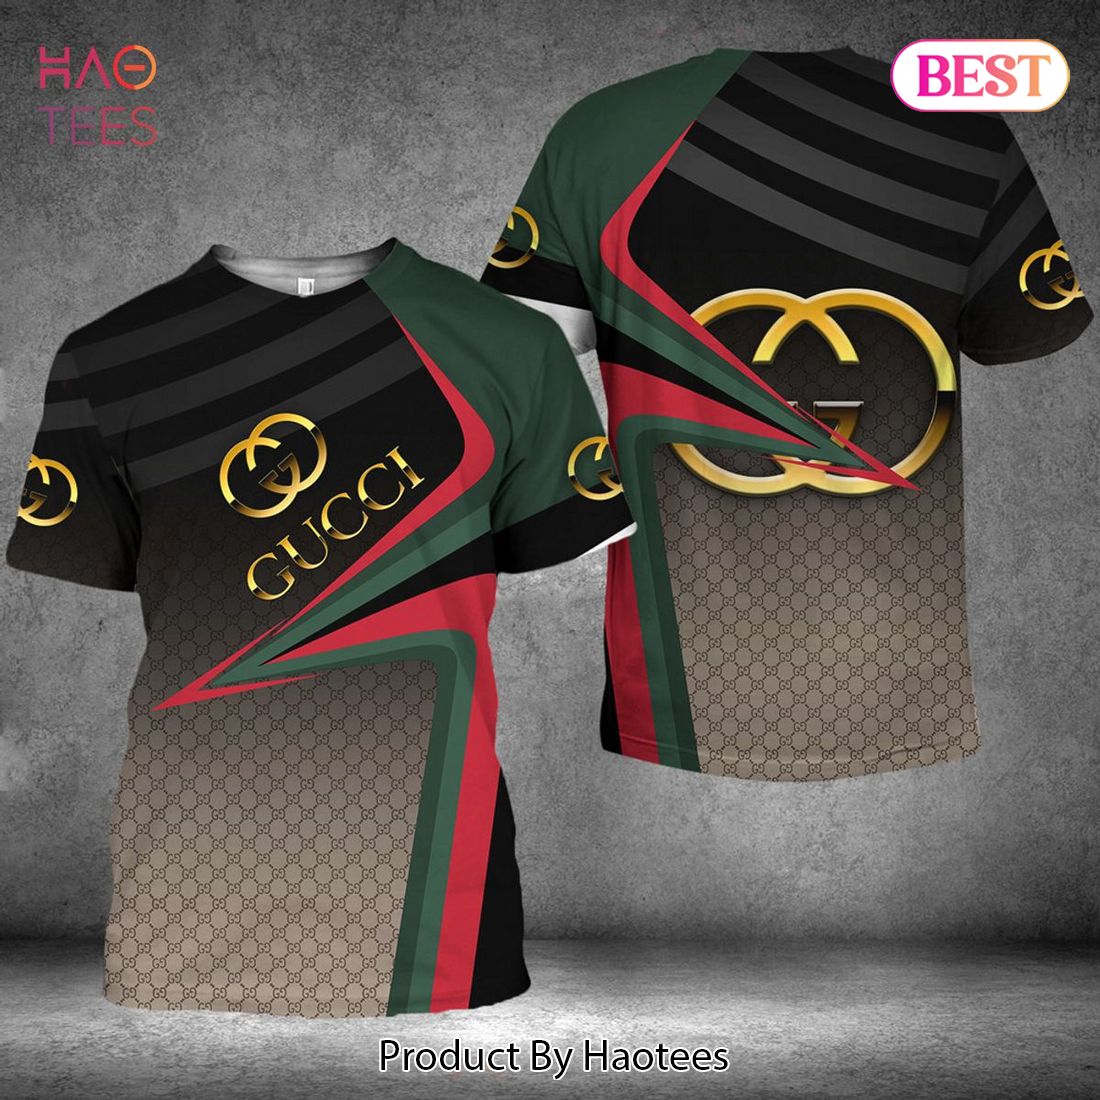 NEW Gucci Black Ombre Luxury Brand 3D T-Shirt Limited Edition